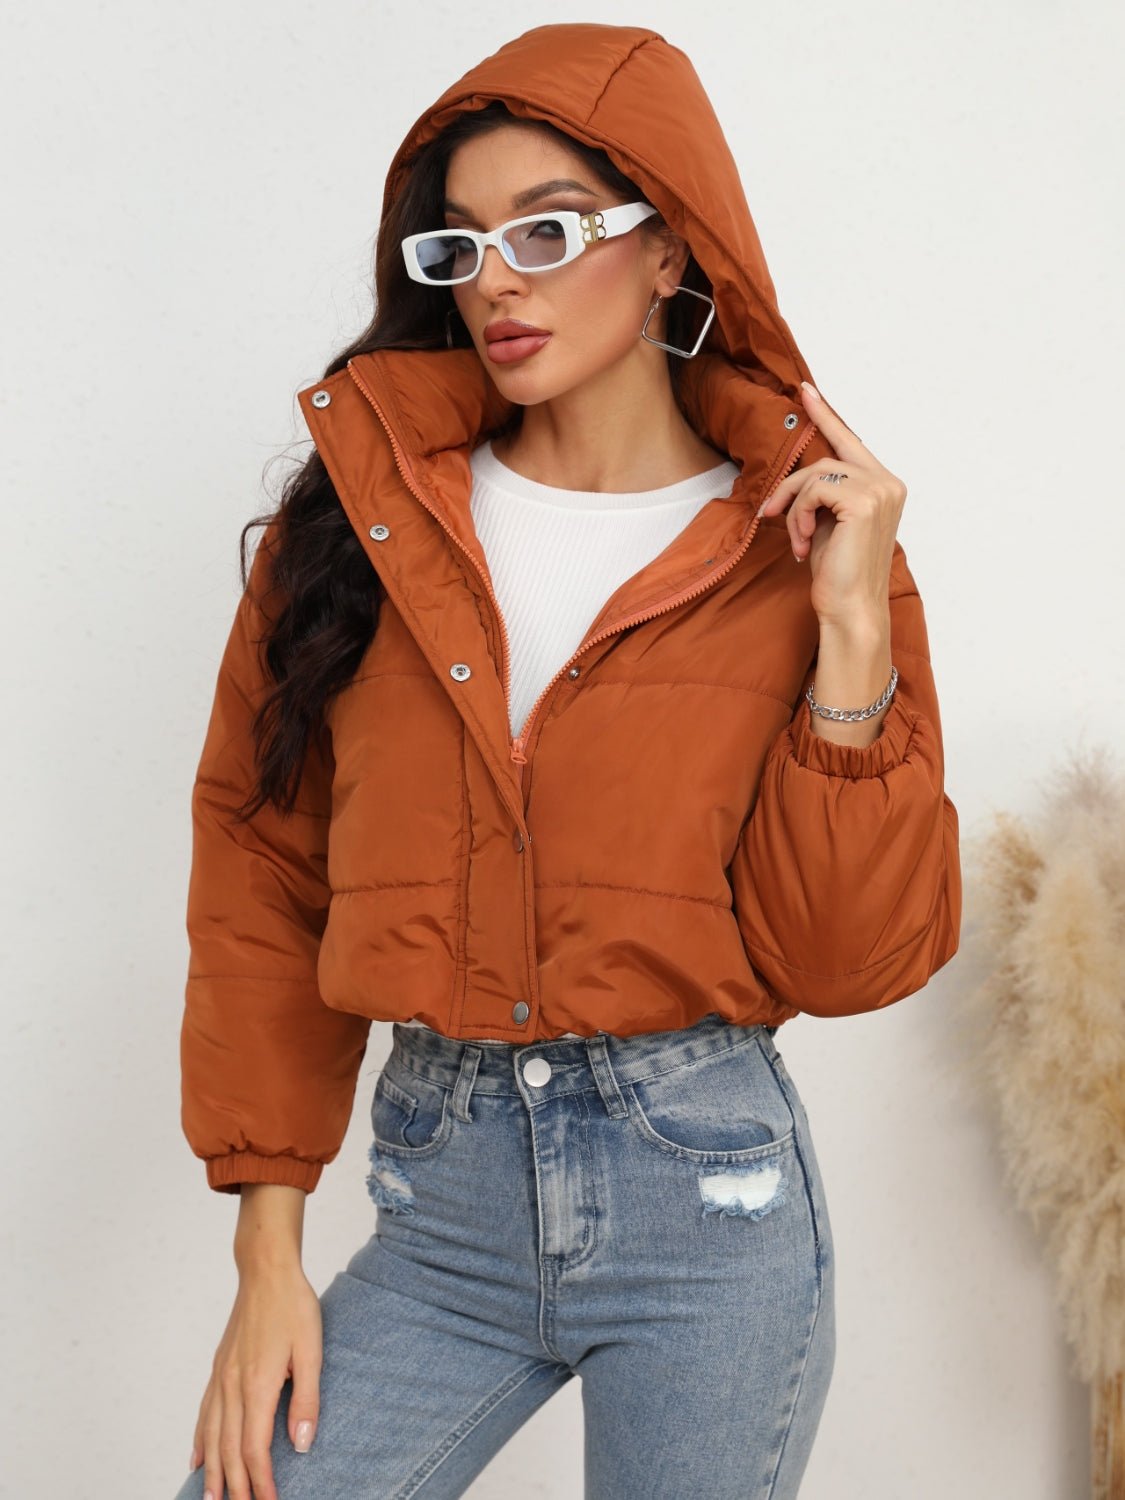 Snap and Zip Closure Hooded Puffer Jacket - Fashion Girl Online Store